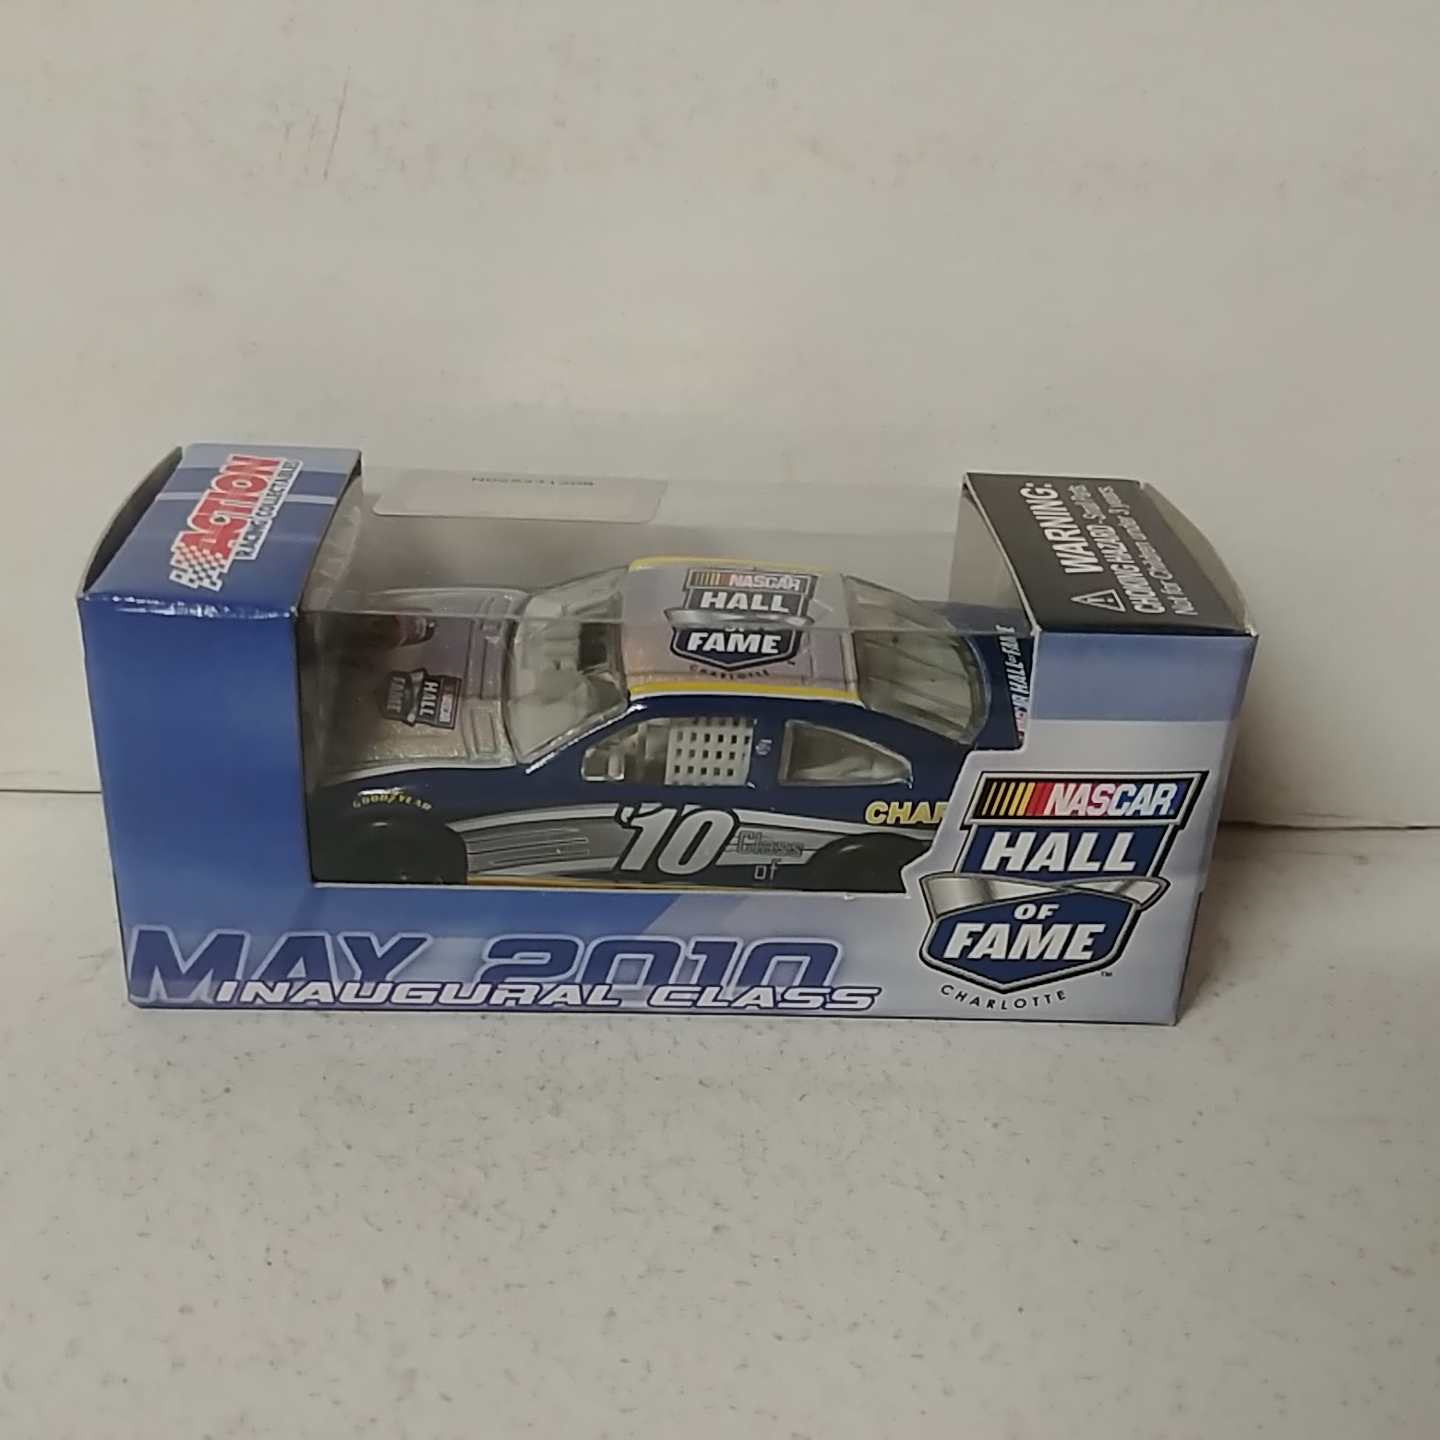 2010 Dale Earnhardt 1/64th "NASCAR Hall of Fame" Pitstop Series car